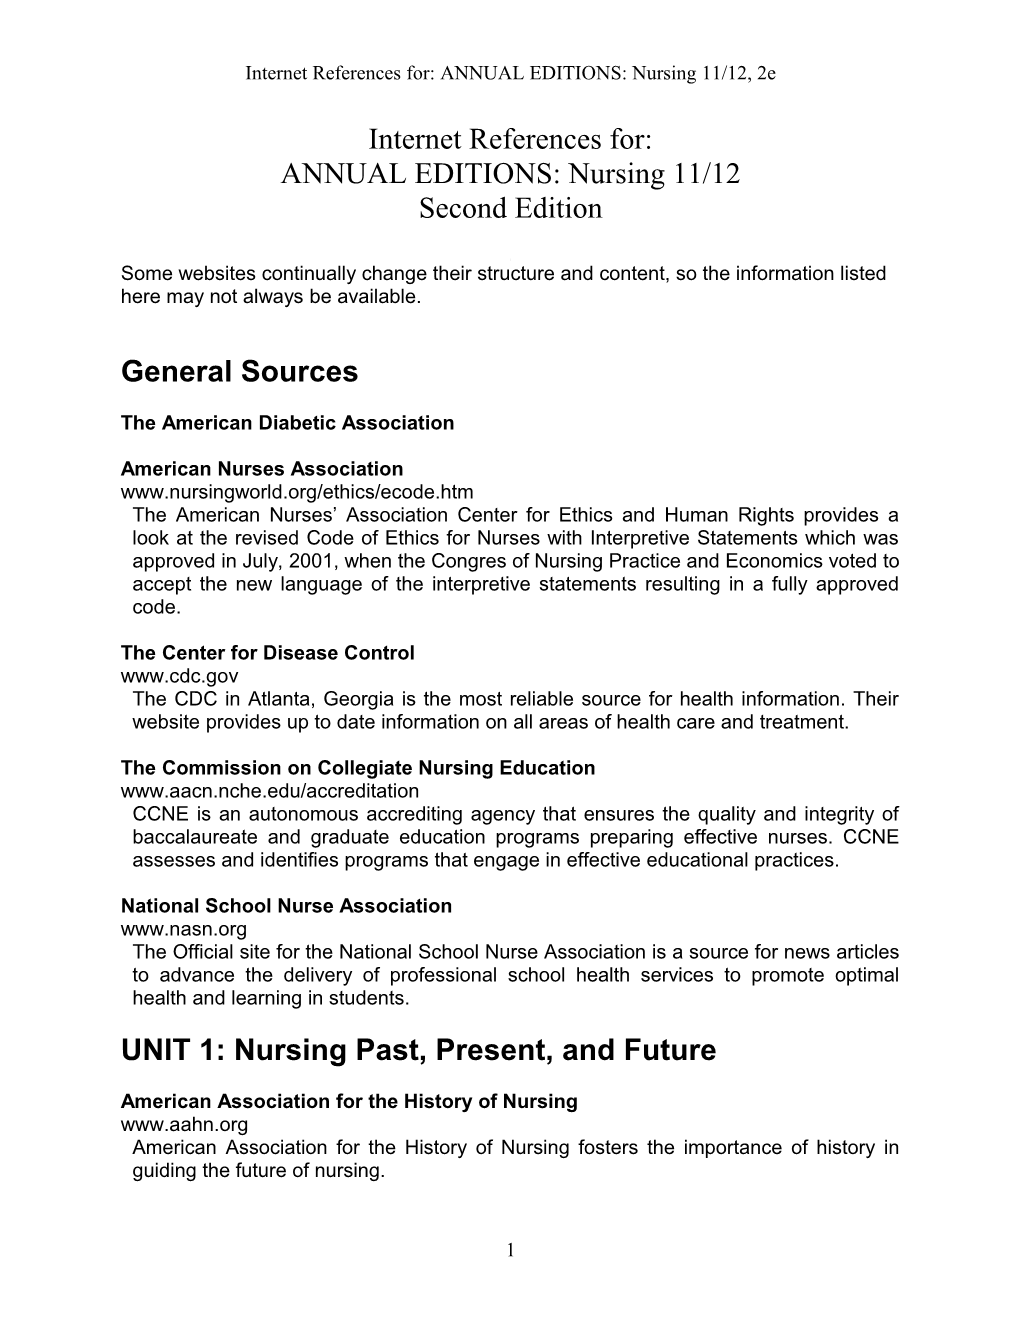 Internet References For:ANNUAL EDITIONS: Nursing 11/12, 2E